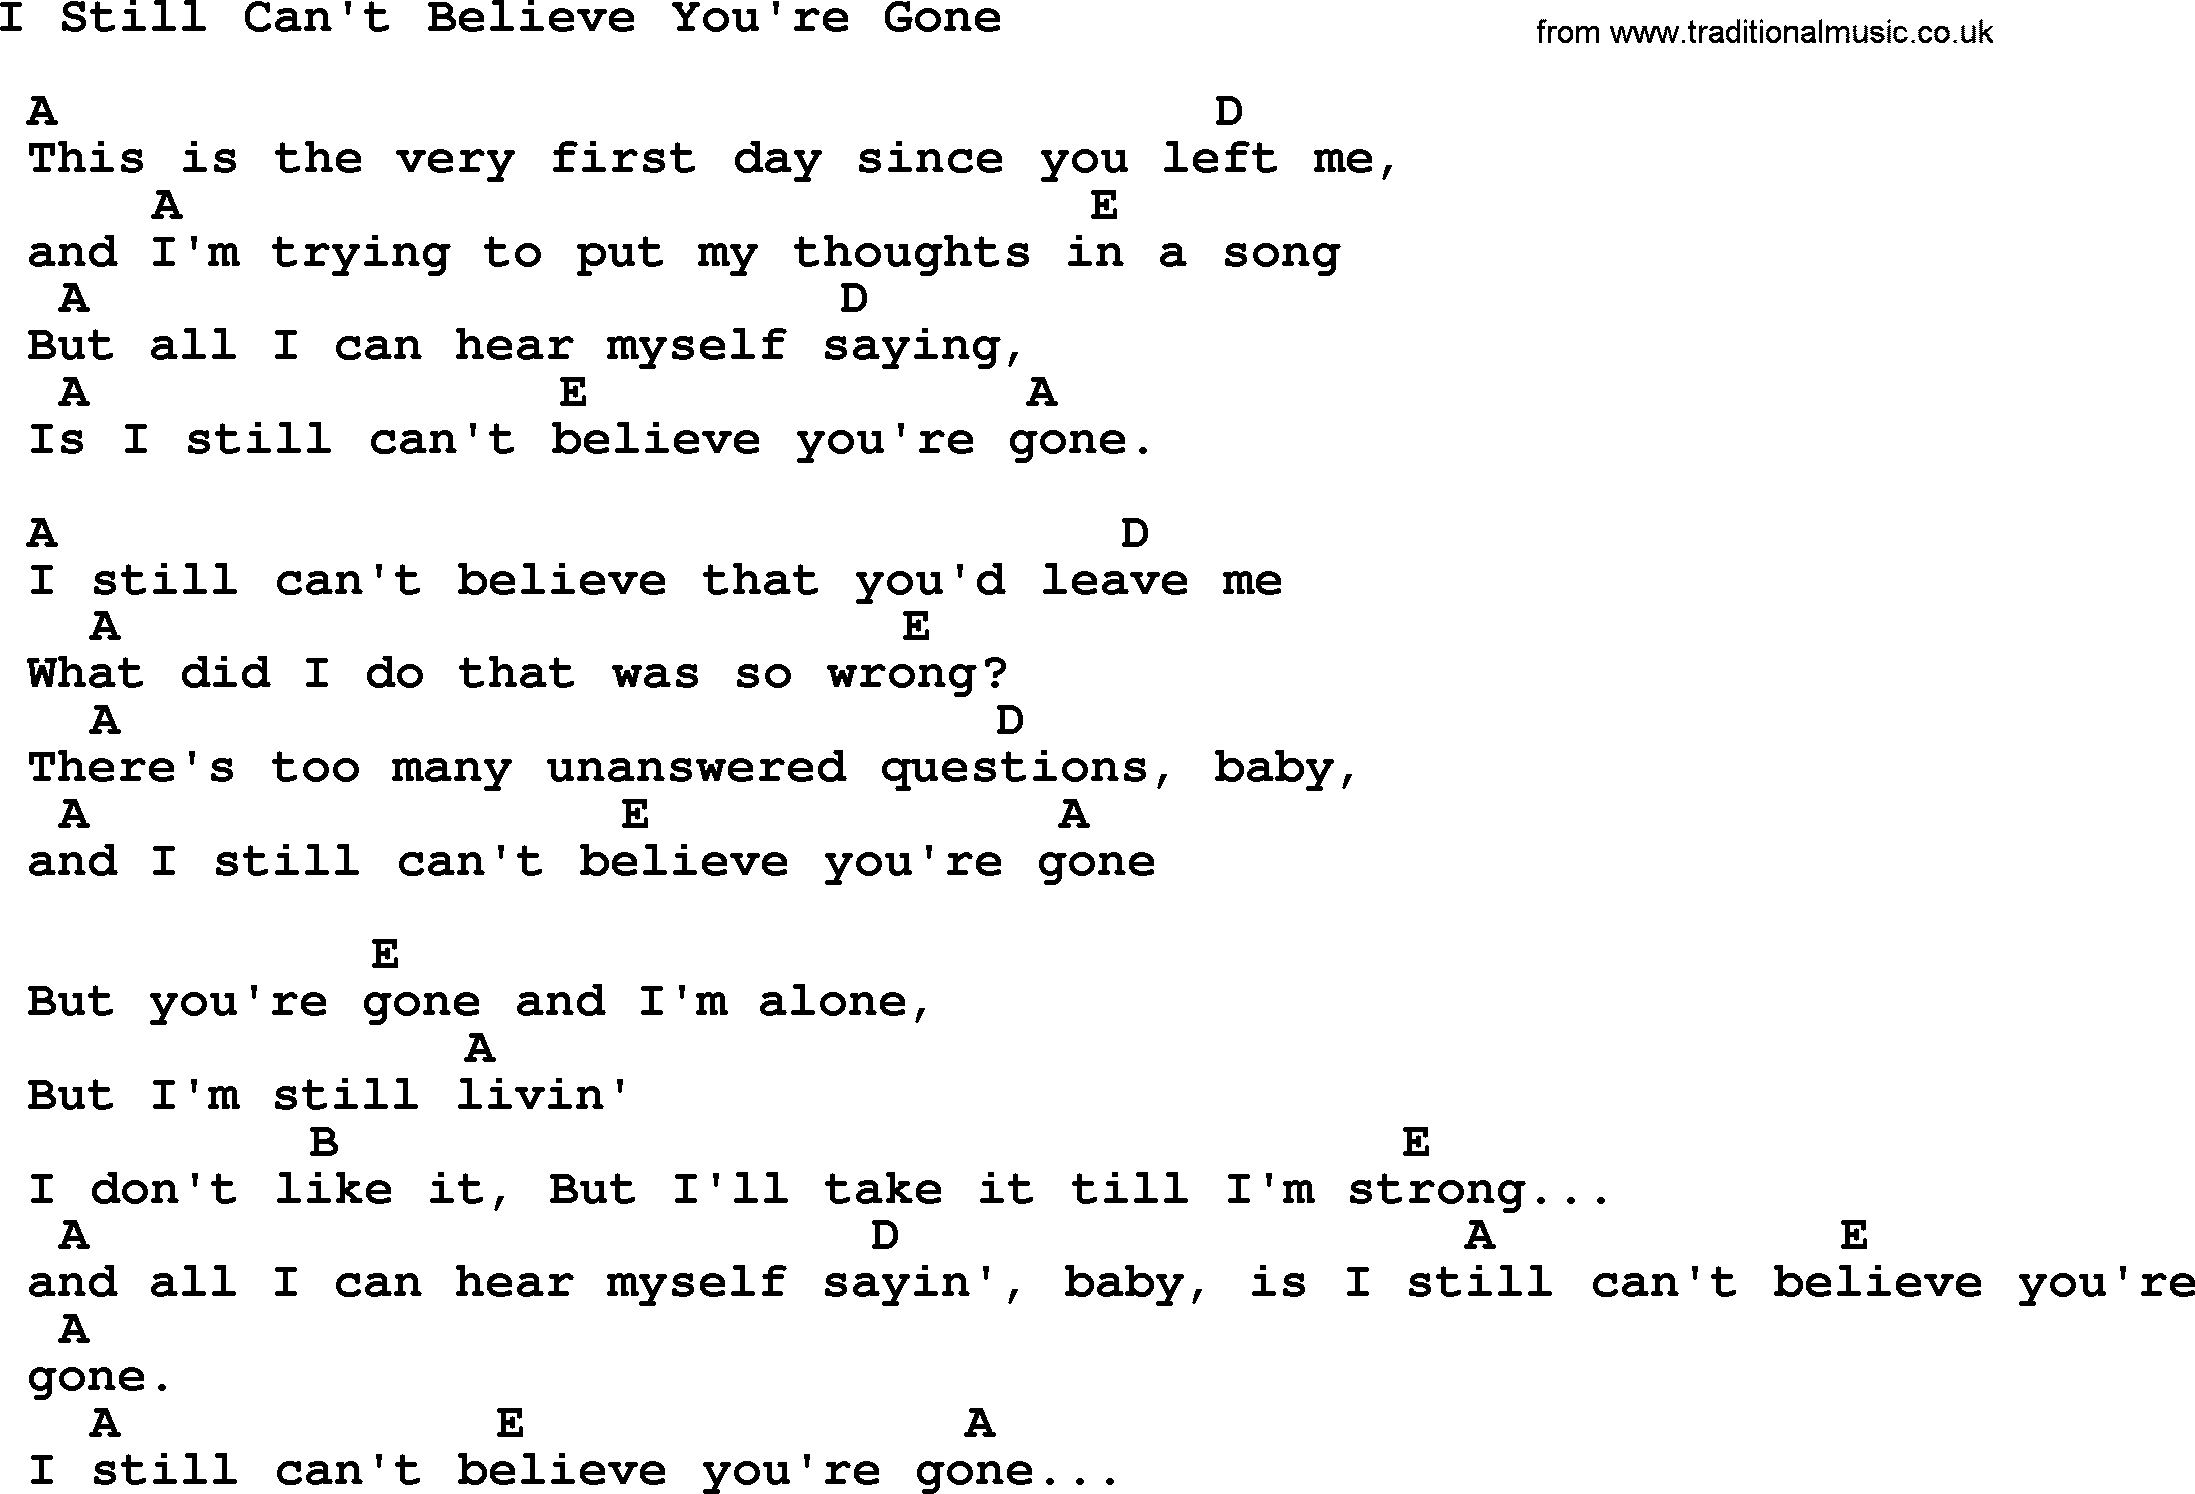 Willie Nelson song: I Still Can't Believe You're Gone, lyrics and chords